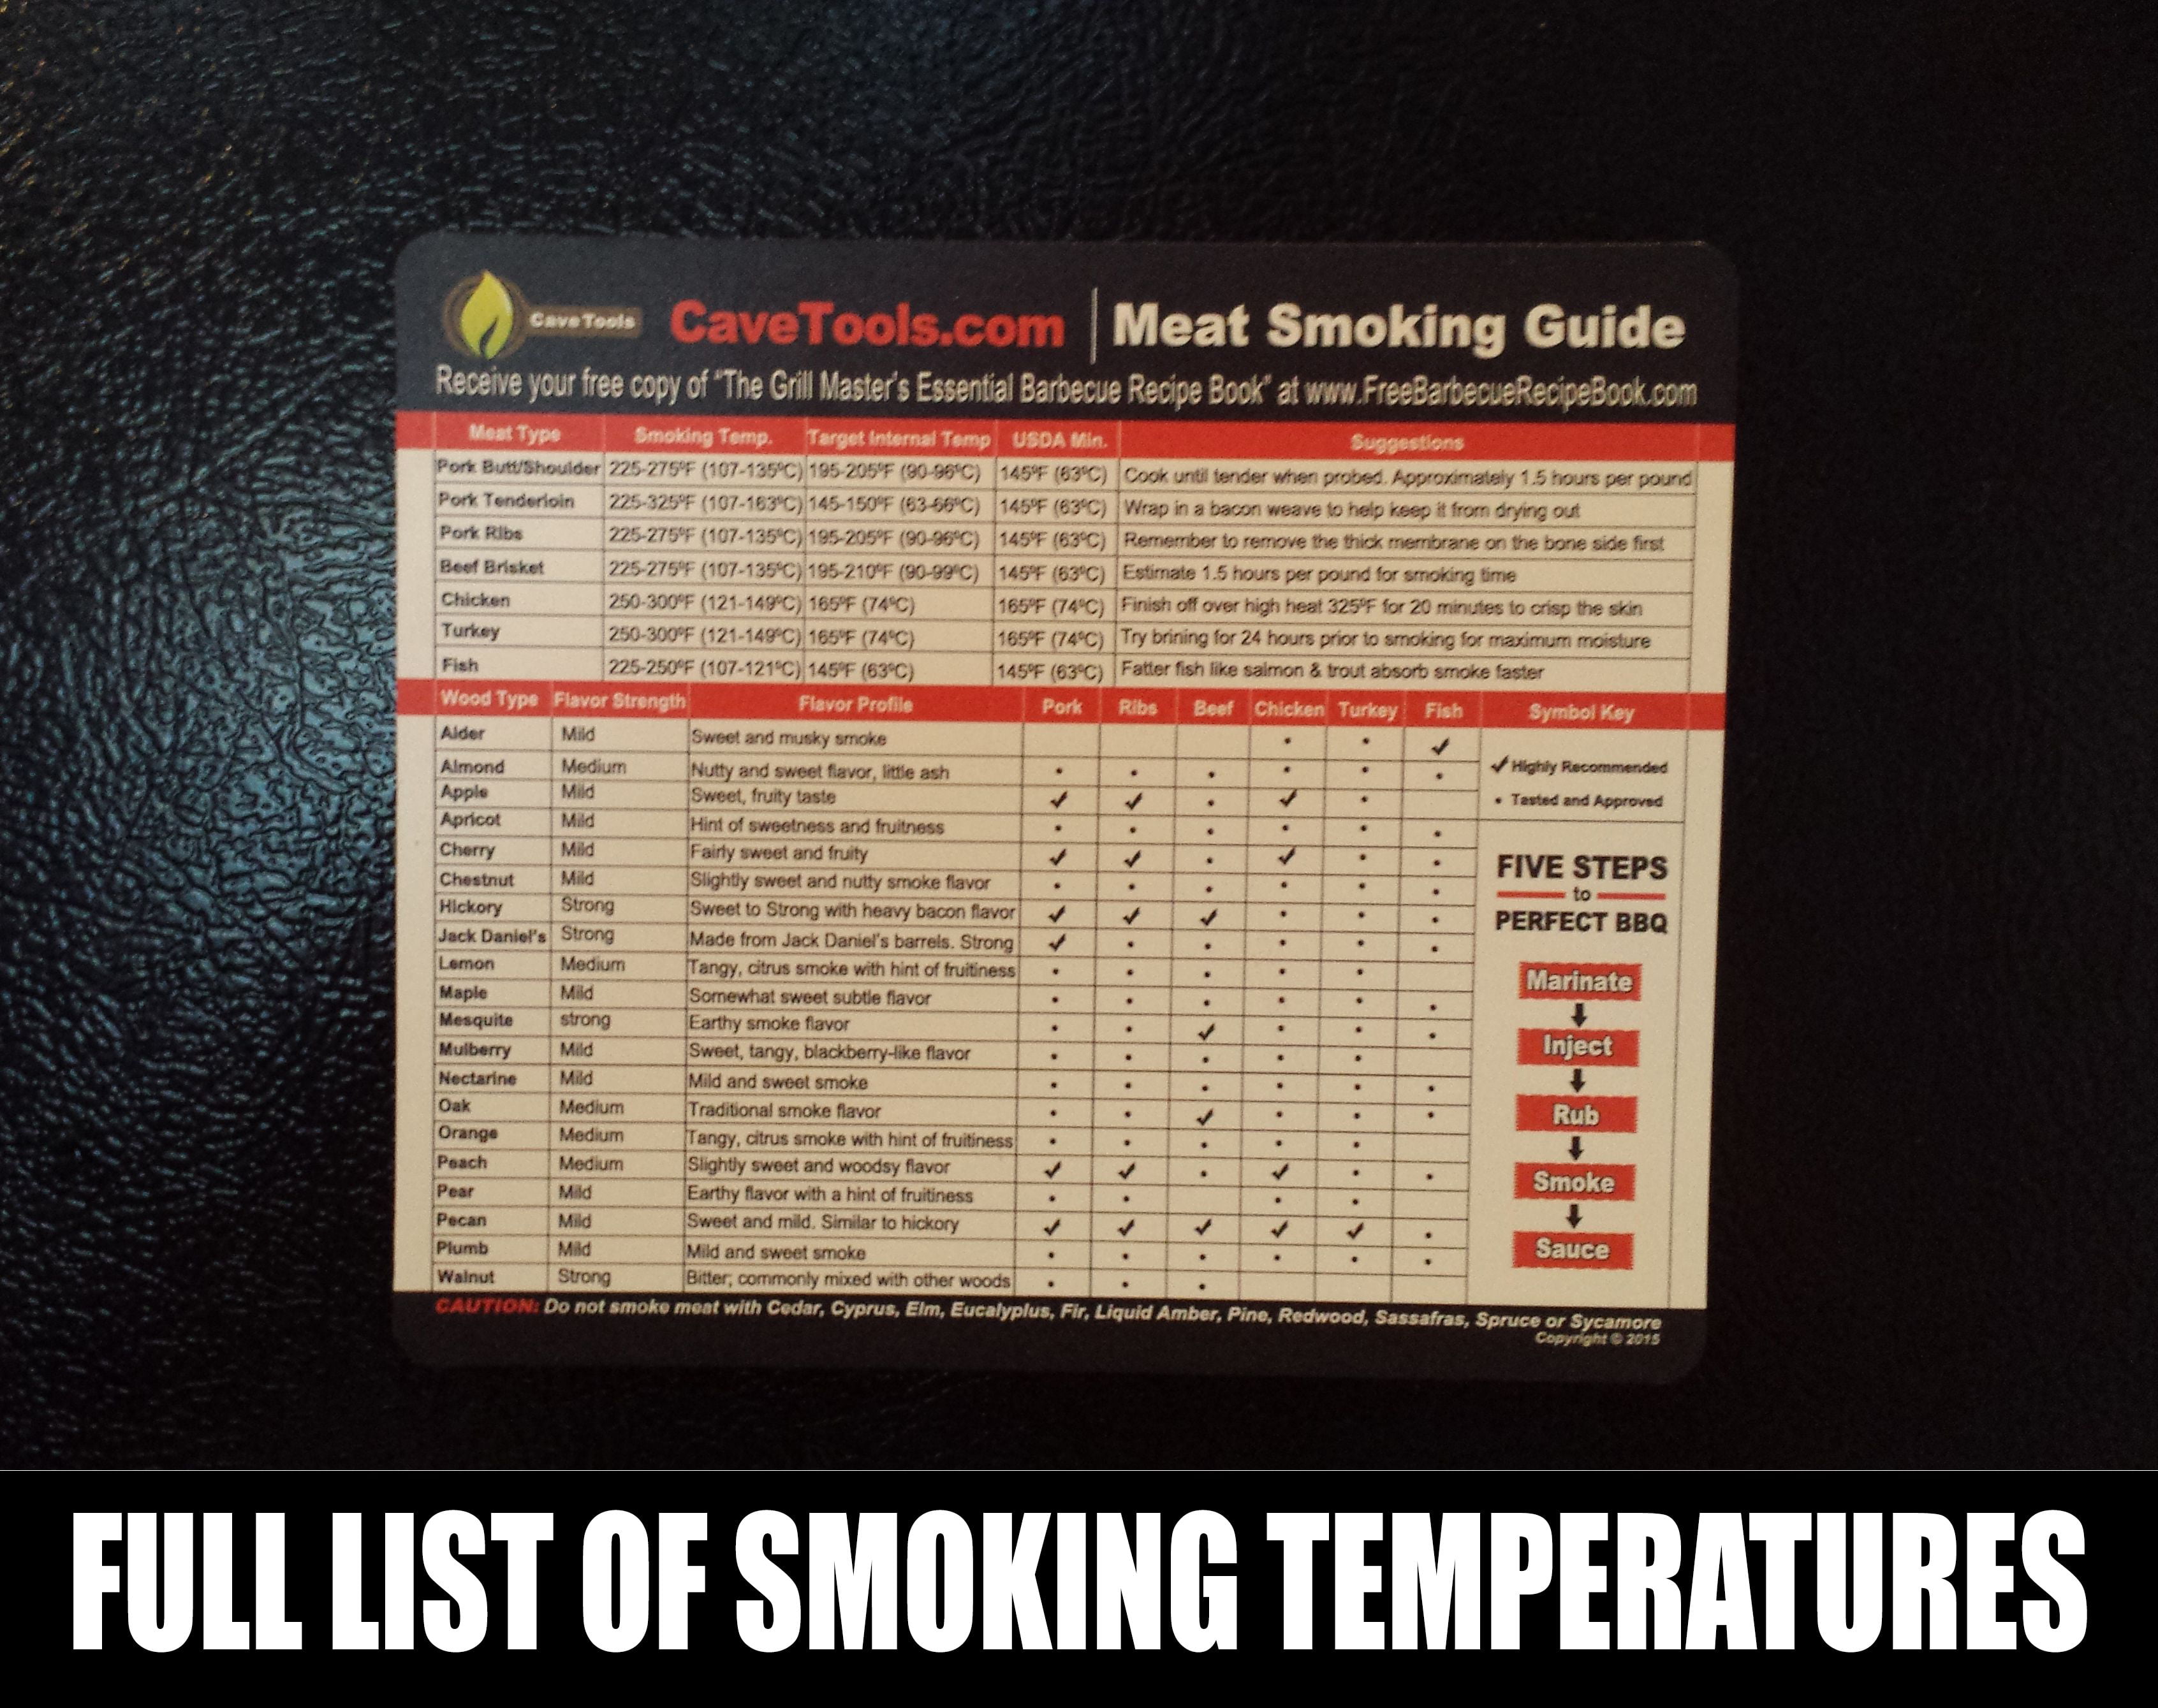 Meat Smoking Guide Best Wood Temperature Chart Outdoor Magnet 20 Types of Flavor Profiles /& Strengths for Smoker Box Voted Top BBQ Accessories for Dad Chips Chunks Log Pellets Can Be Smoked